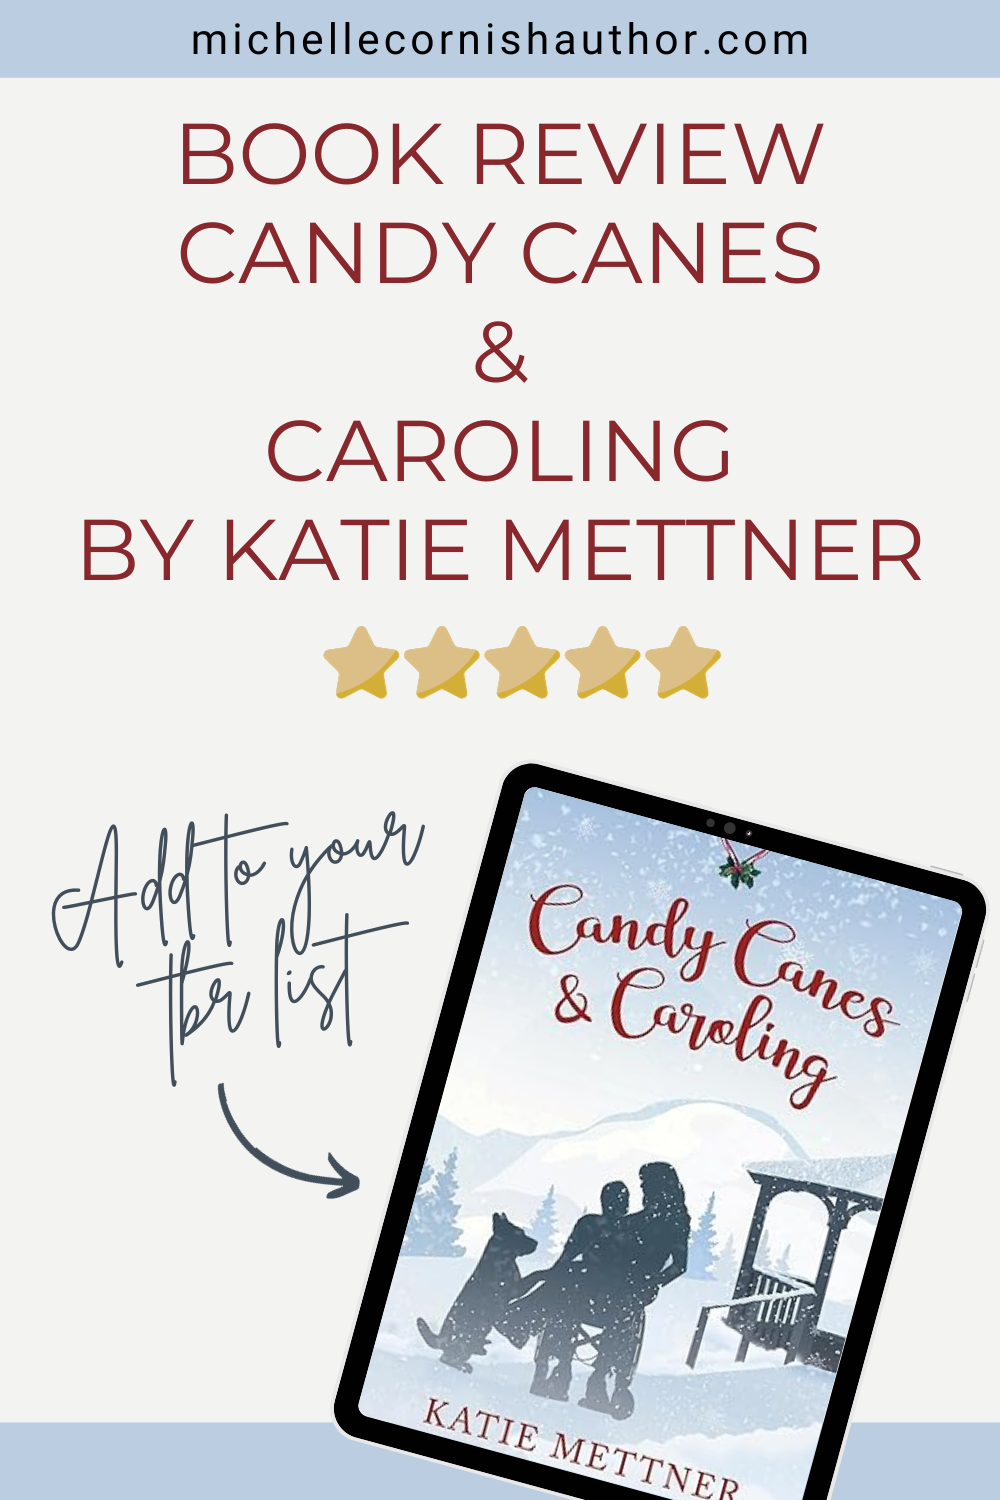 Book Review of Candy Canes & Caroling by Katie Mettner